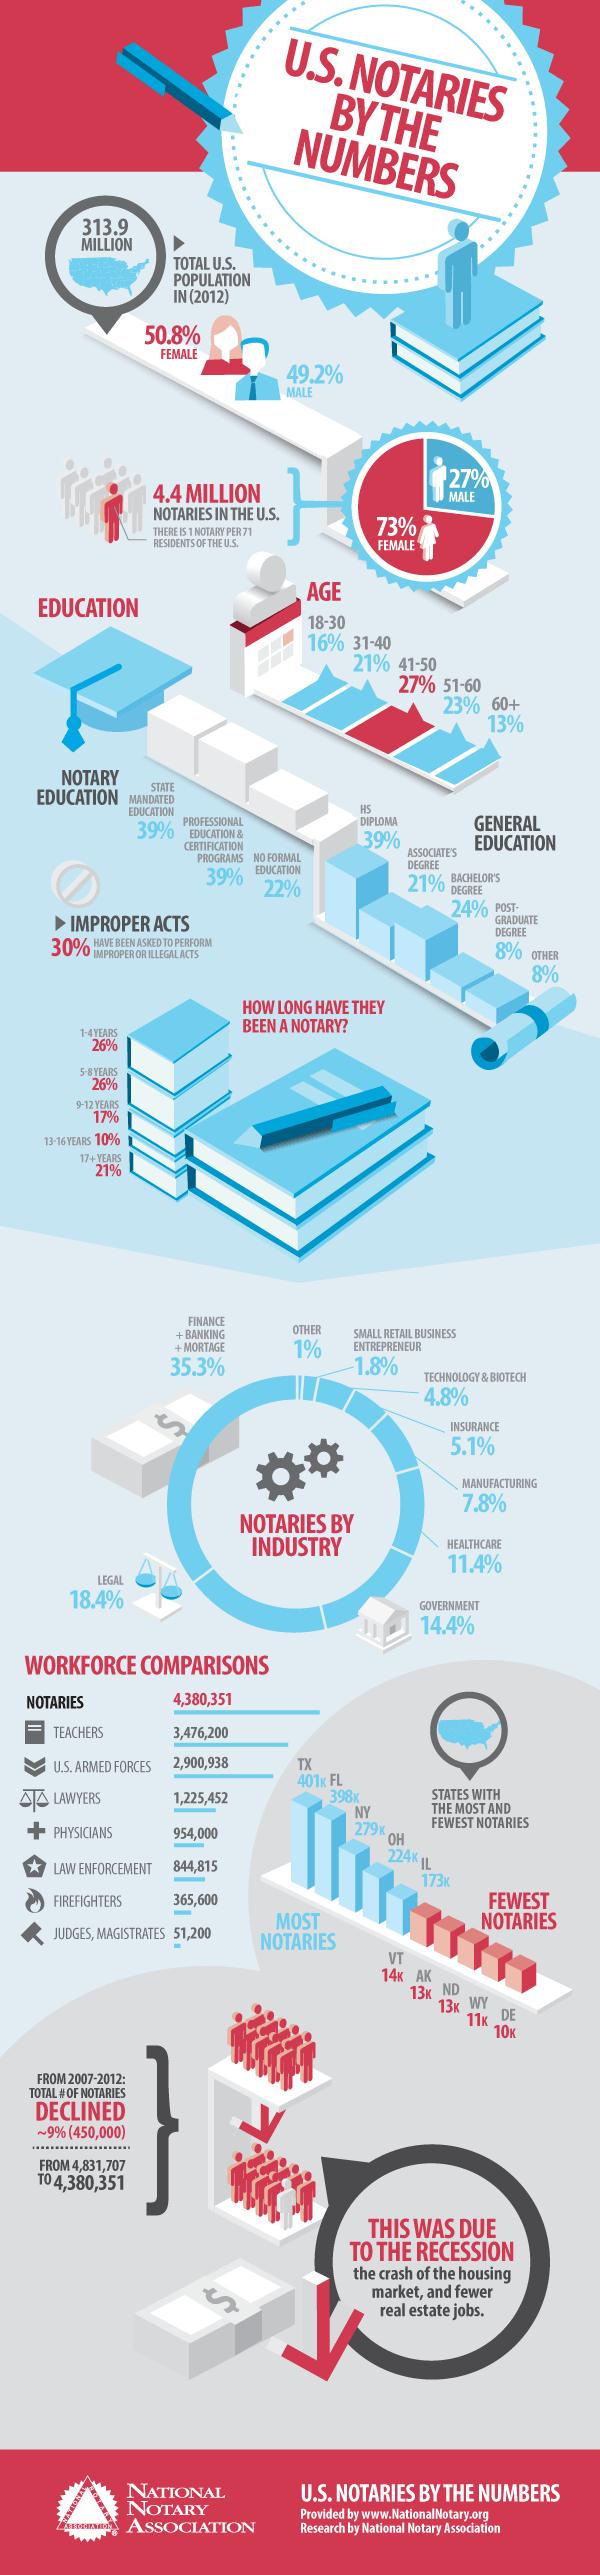 US Notaries Infographic